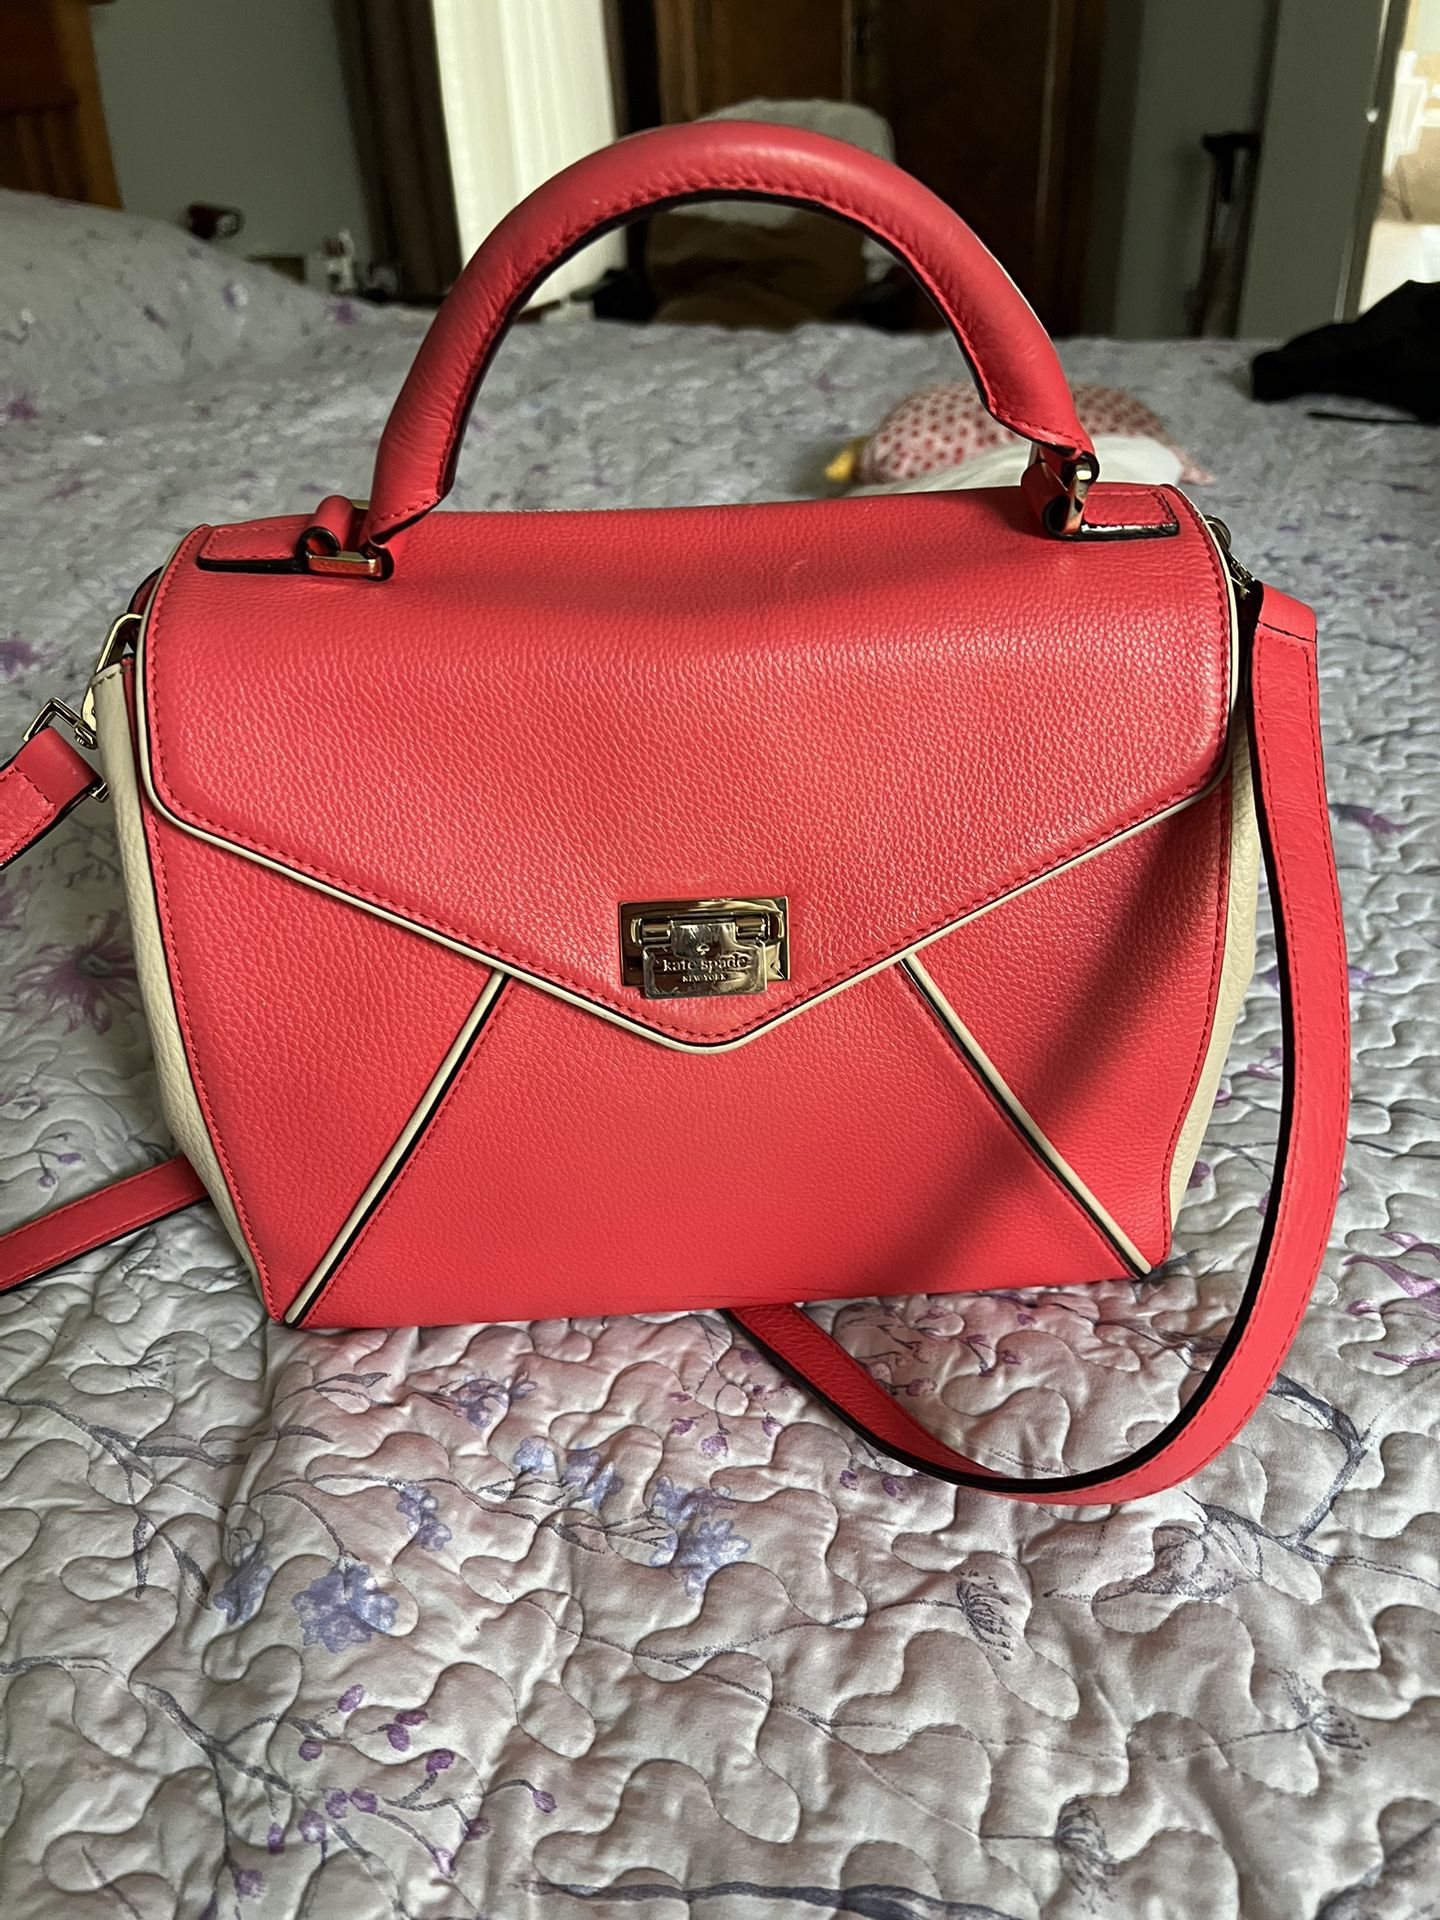 Kate Spade Pink And Cream Handbag  Cow Leather Perfect For Many Occasions. Medium Size Gold Latch. Adjustable/Detachable Strap  Measures 